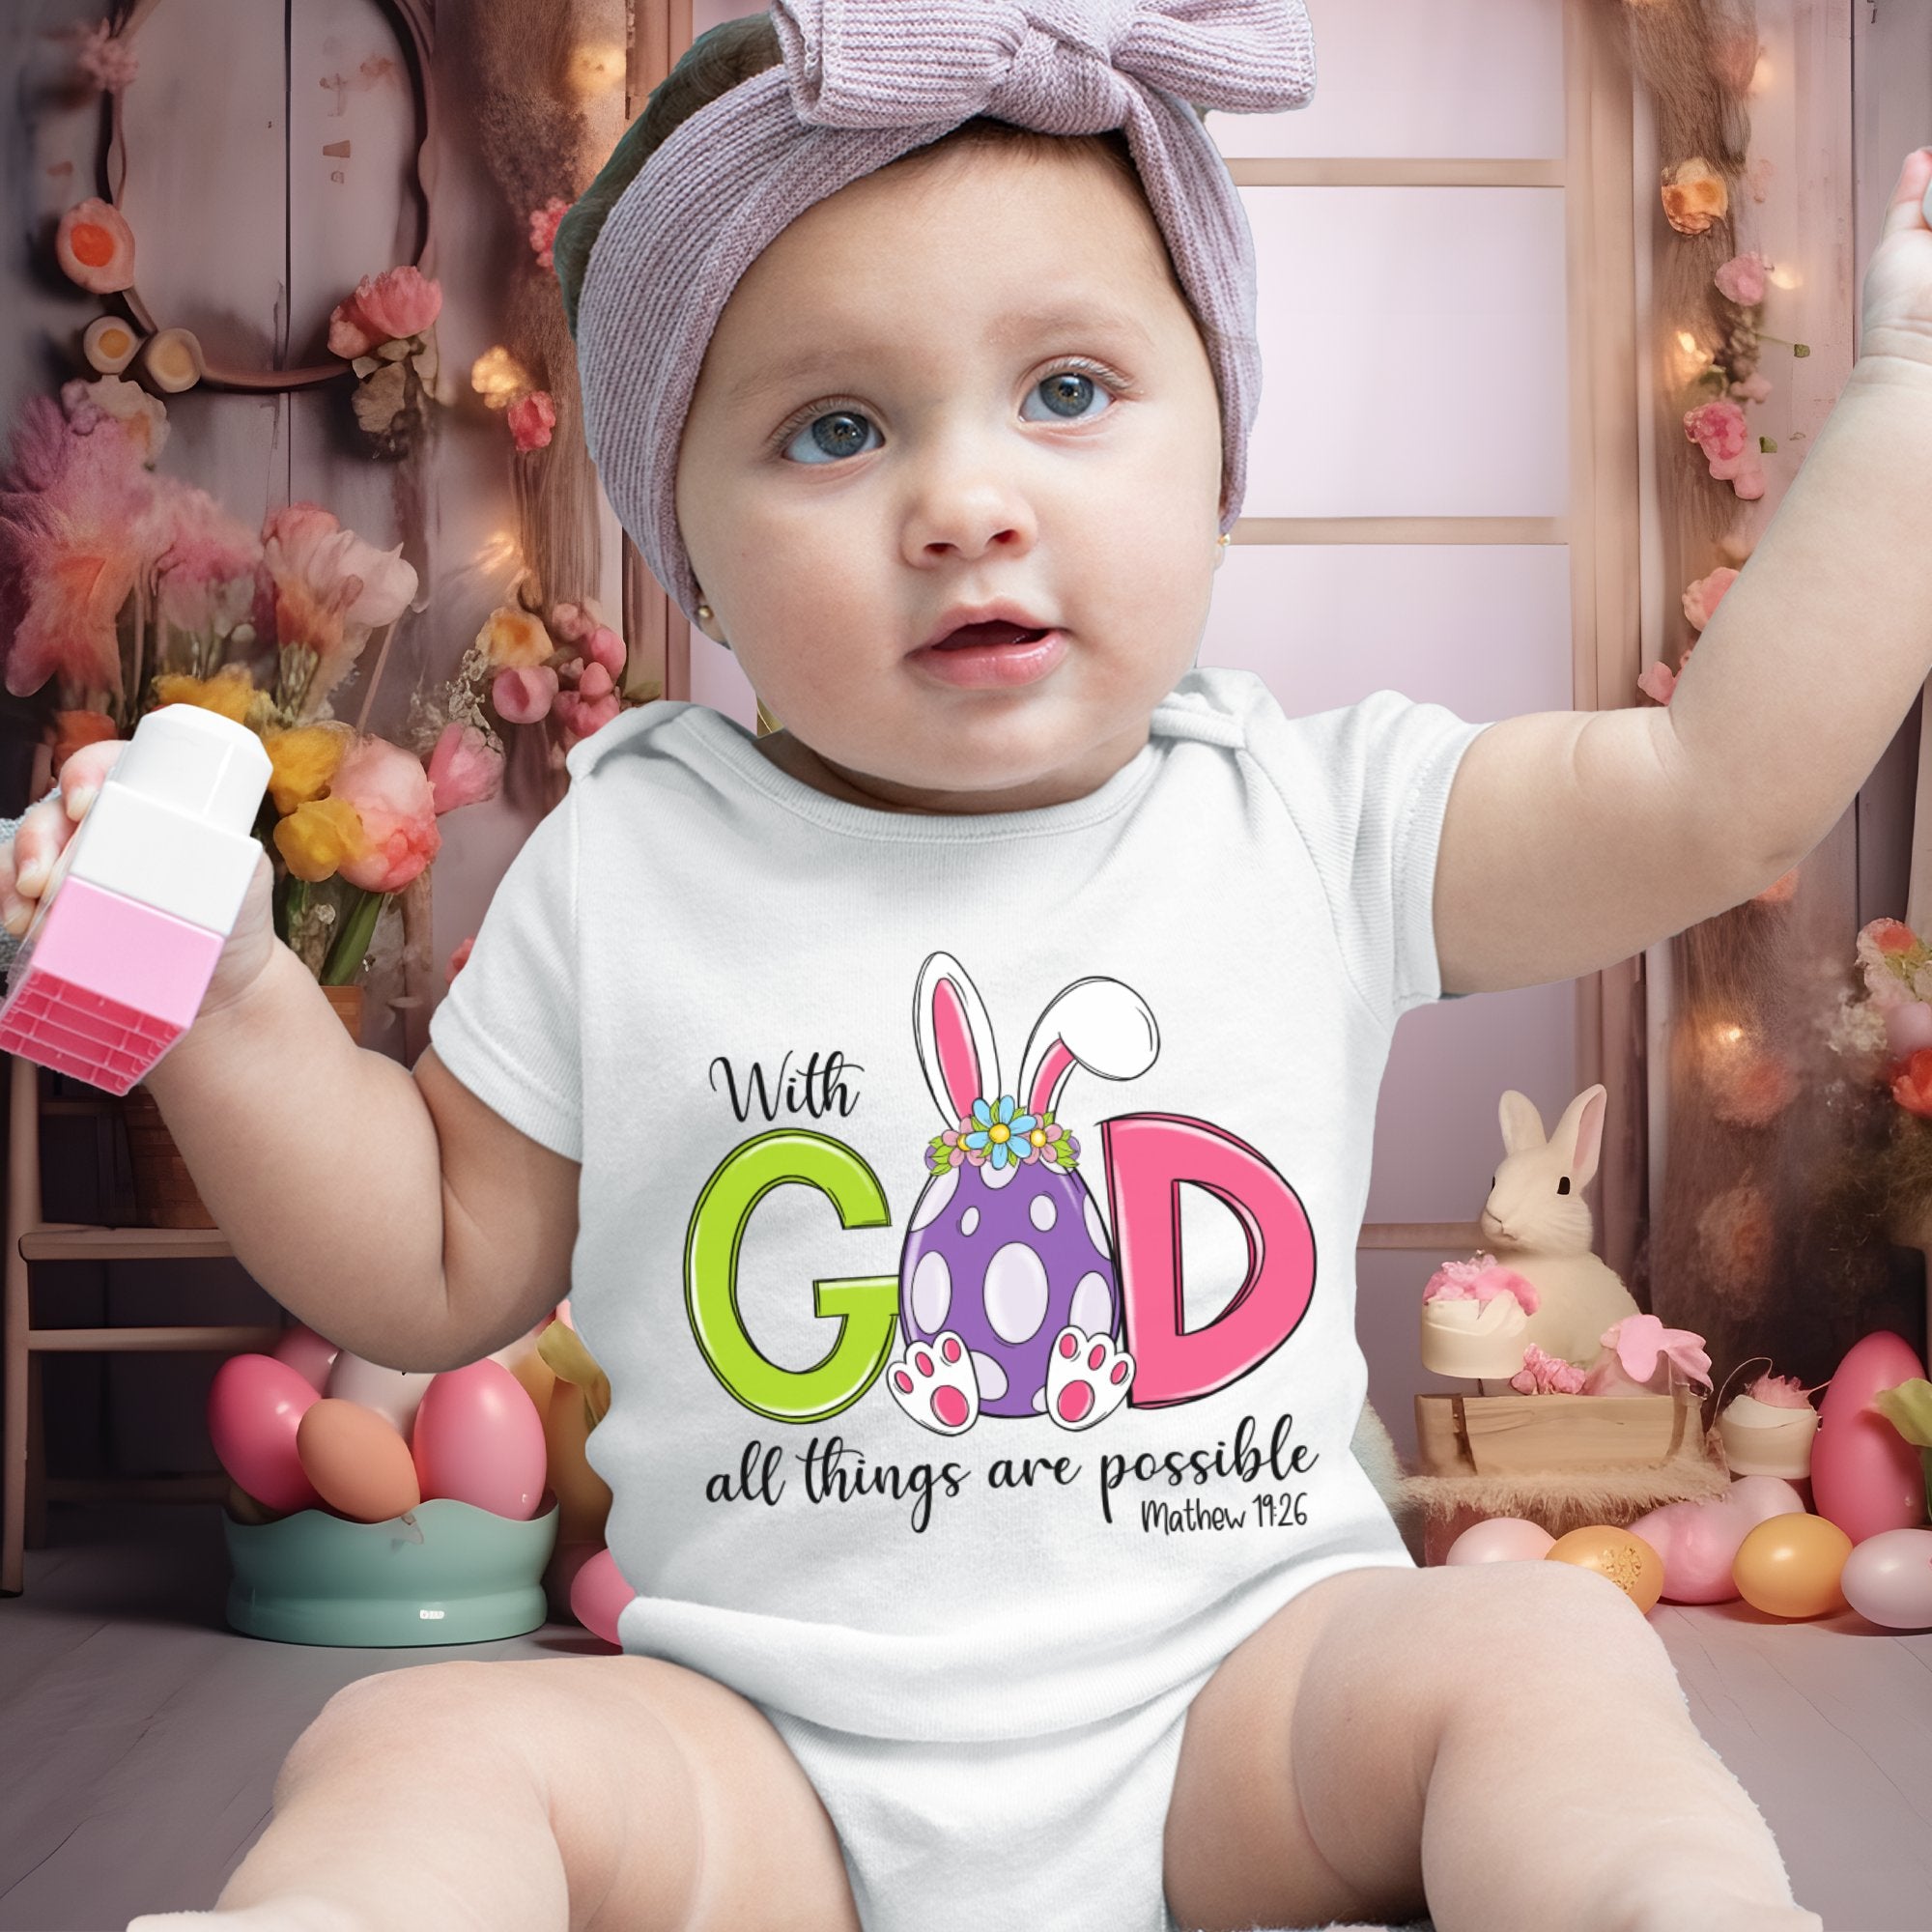 With God all is Possible Infant Fine Jersey Bodysuit, Christian Kids Tshirts, Religious Gifts, Bible Verse Baby, Cute Easter Baby Bodysuit Size: 6mo Color: White Jesus Passion Apparel